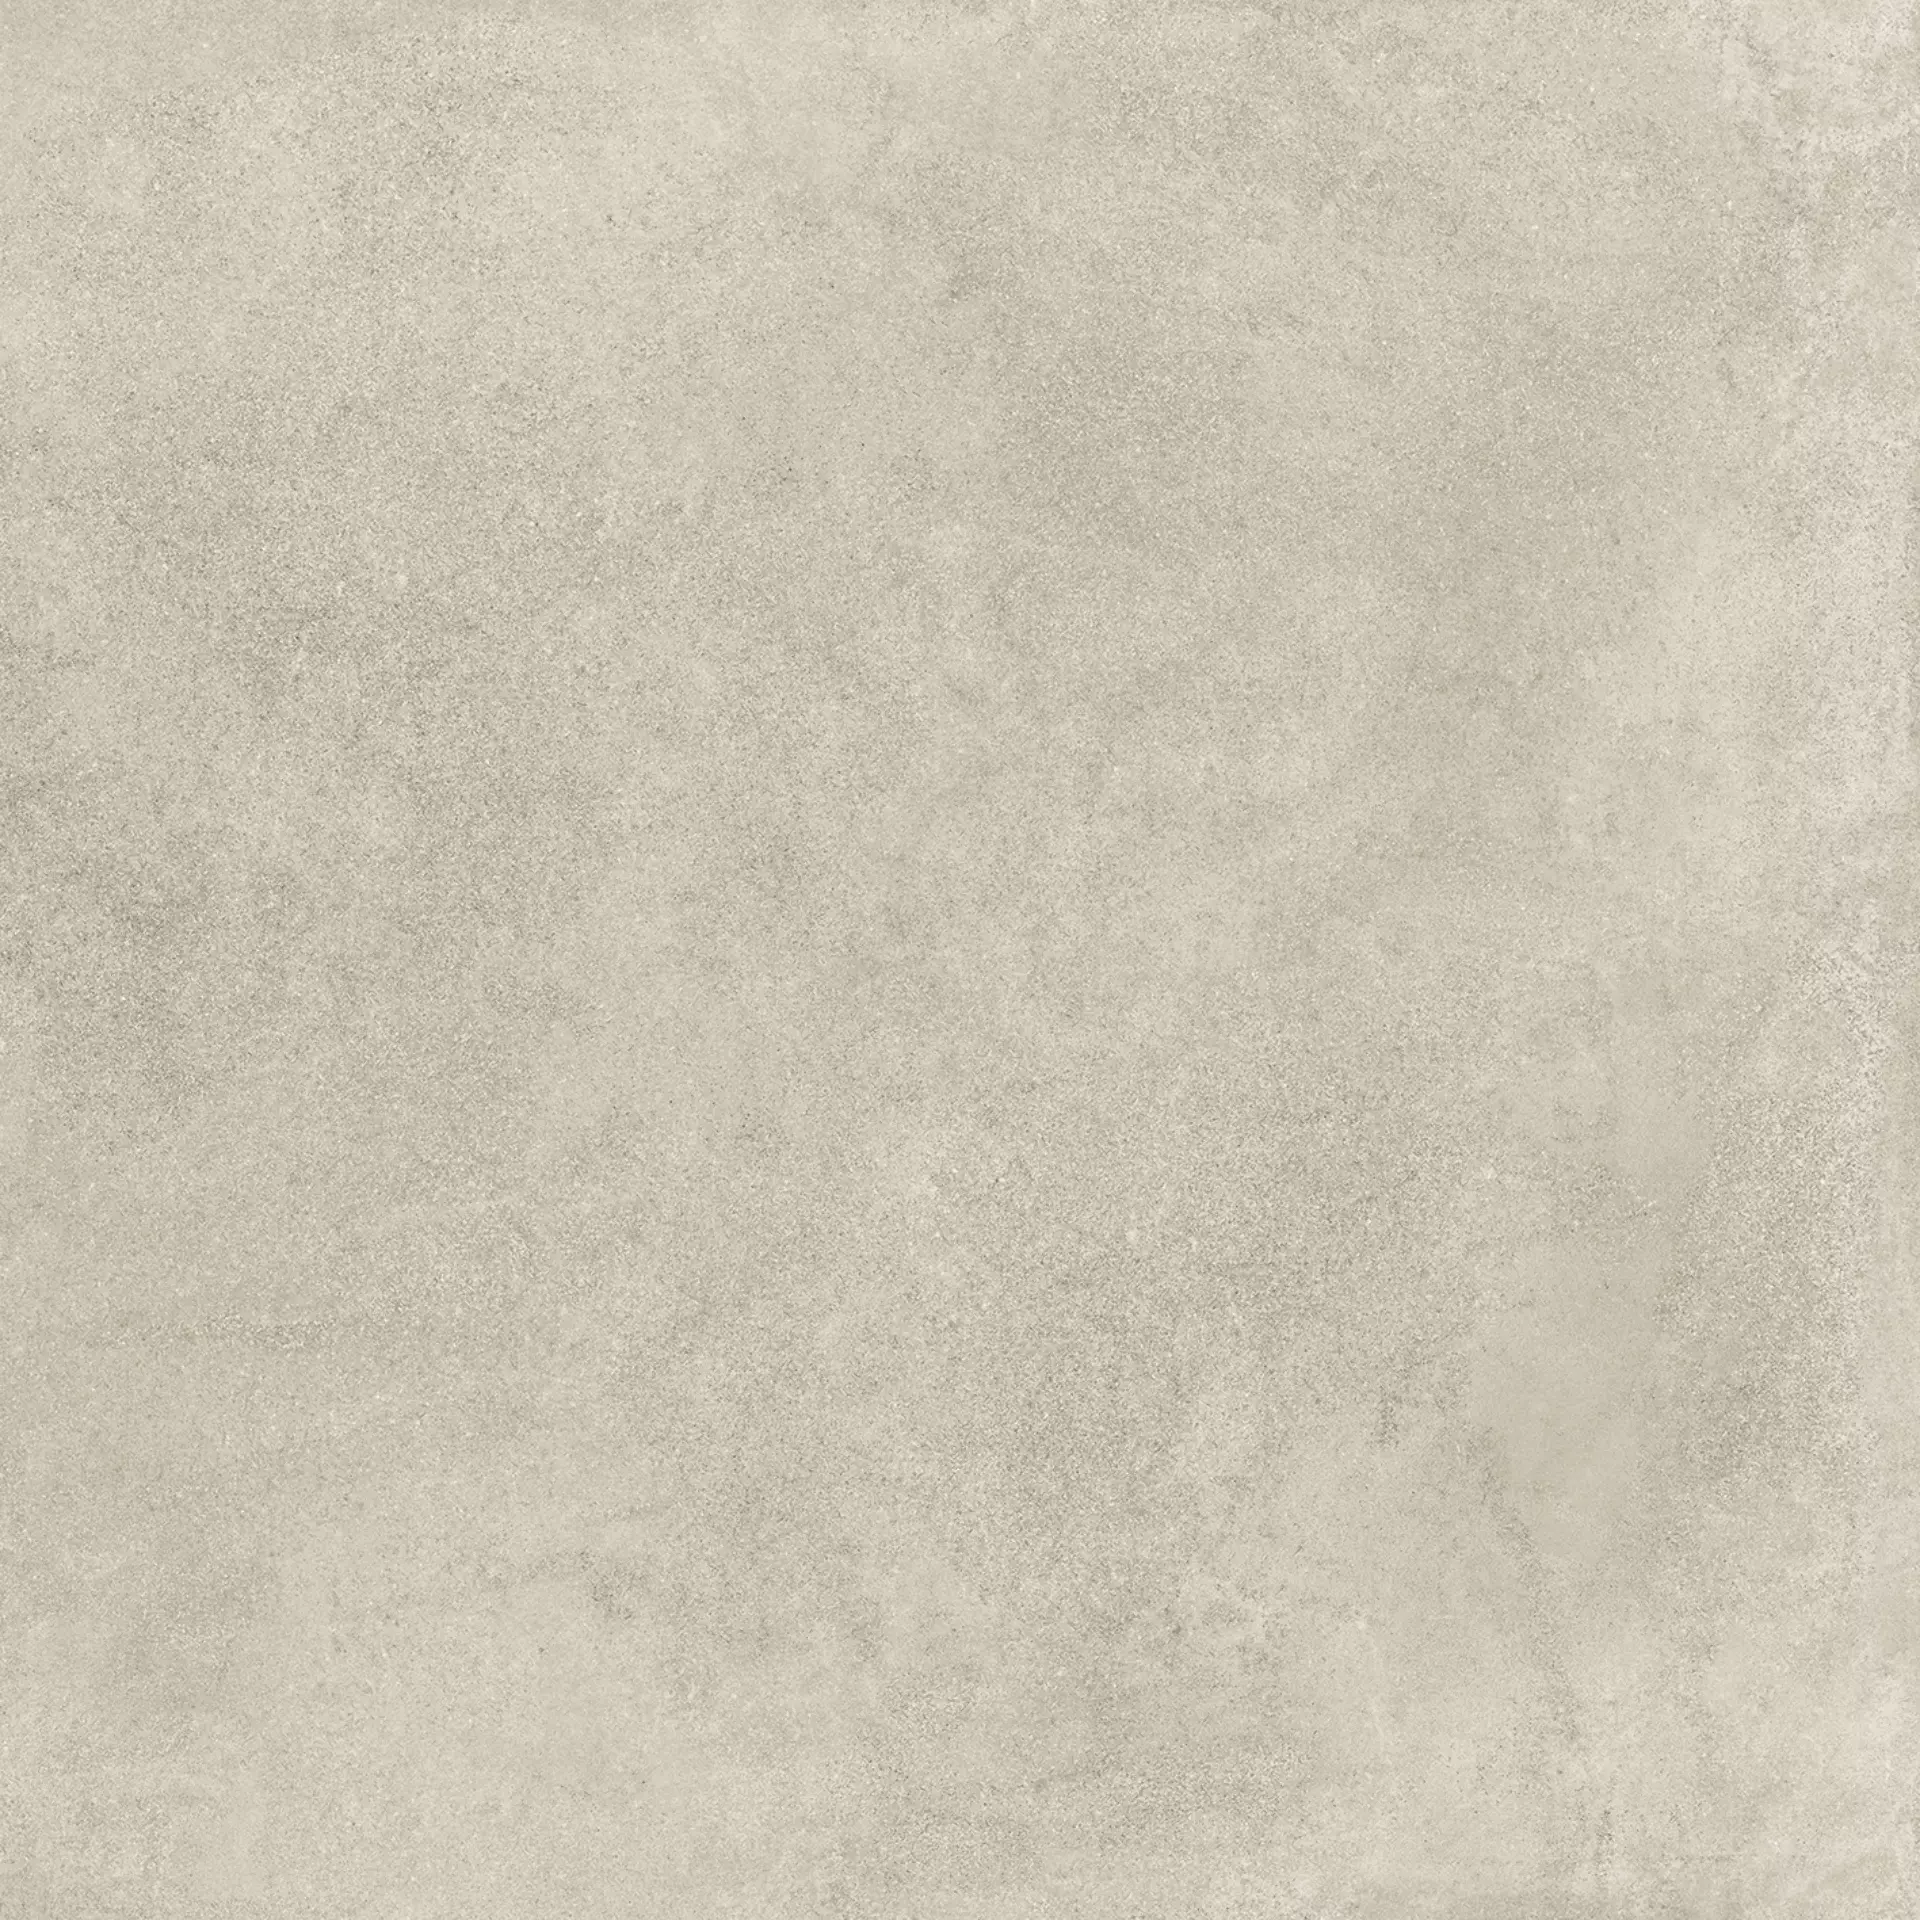 Emilceramica Be-Square Sand Naturale EDPG 120x120cm rectified 6,5mm